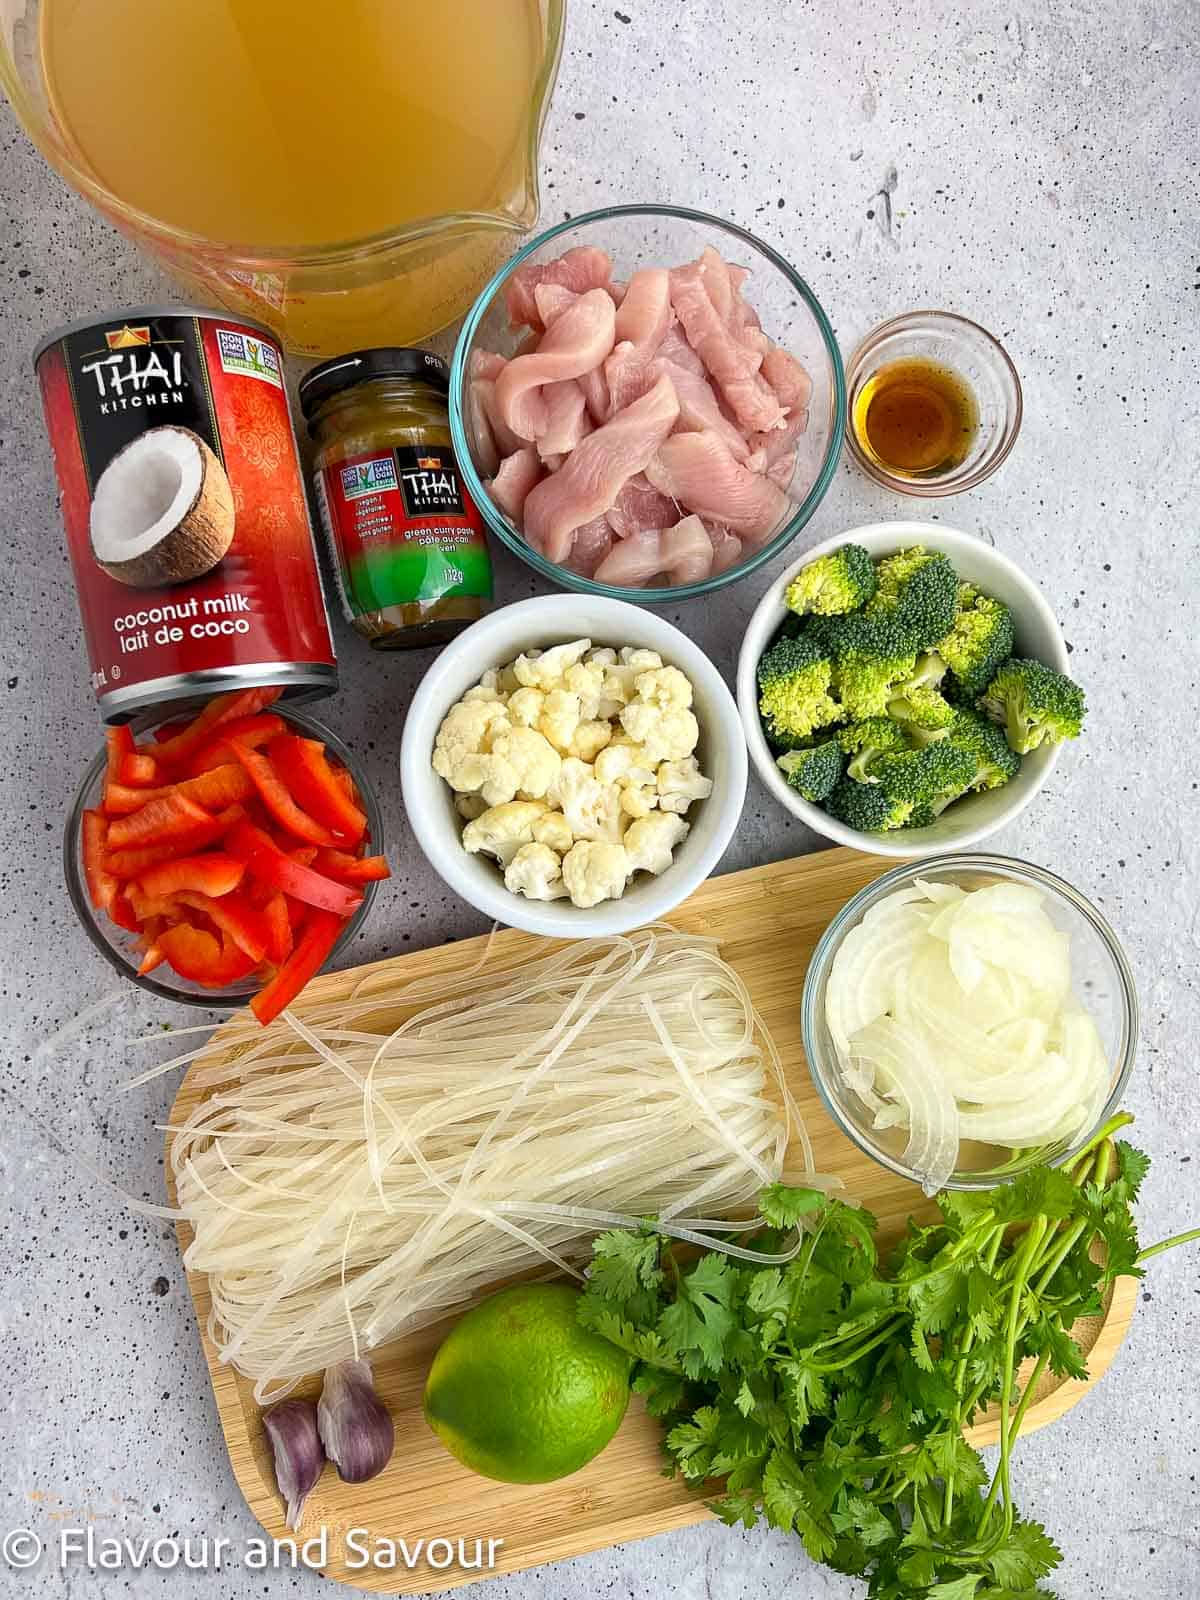 Ingredients for Thai chicken noodle soup.